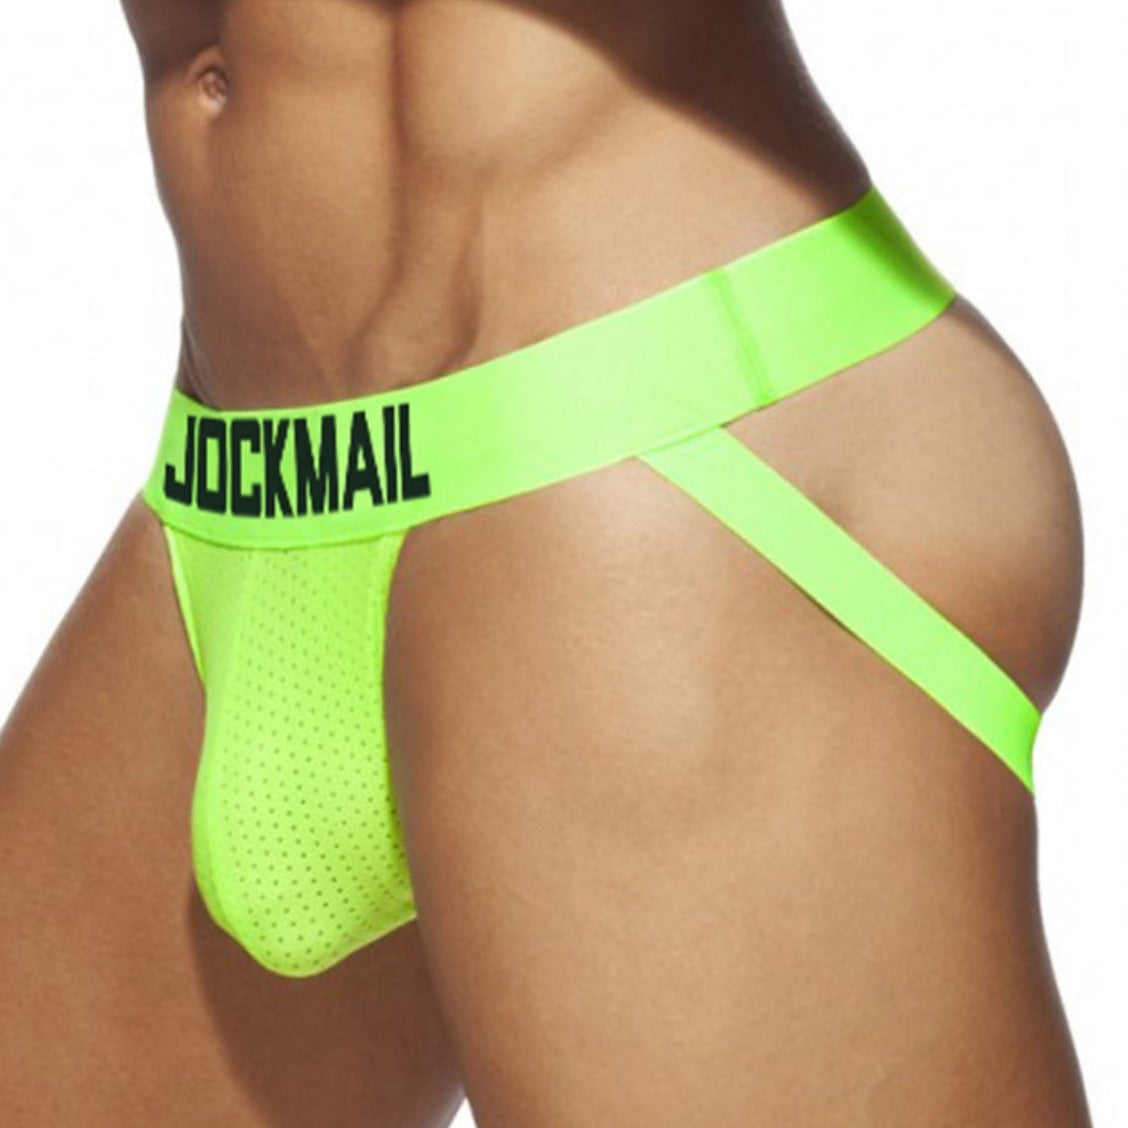 Stylish, nice and comfortable jockstraps. Available in many colors